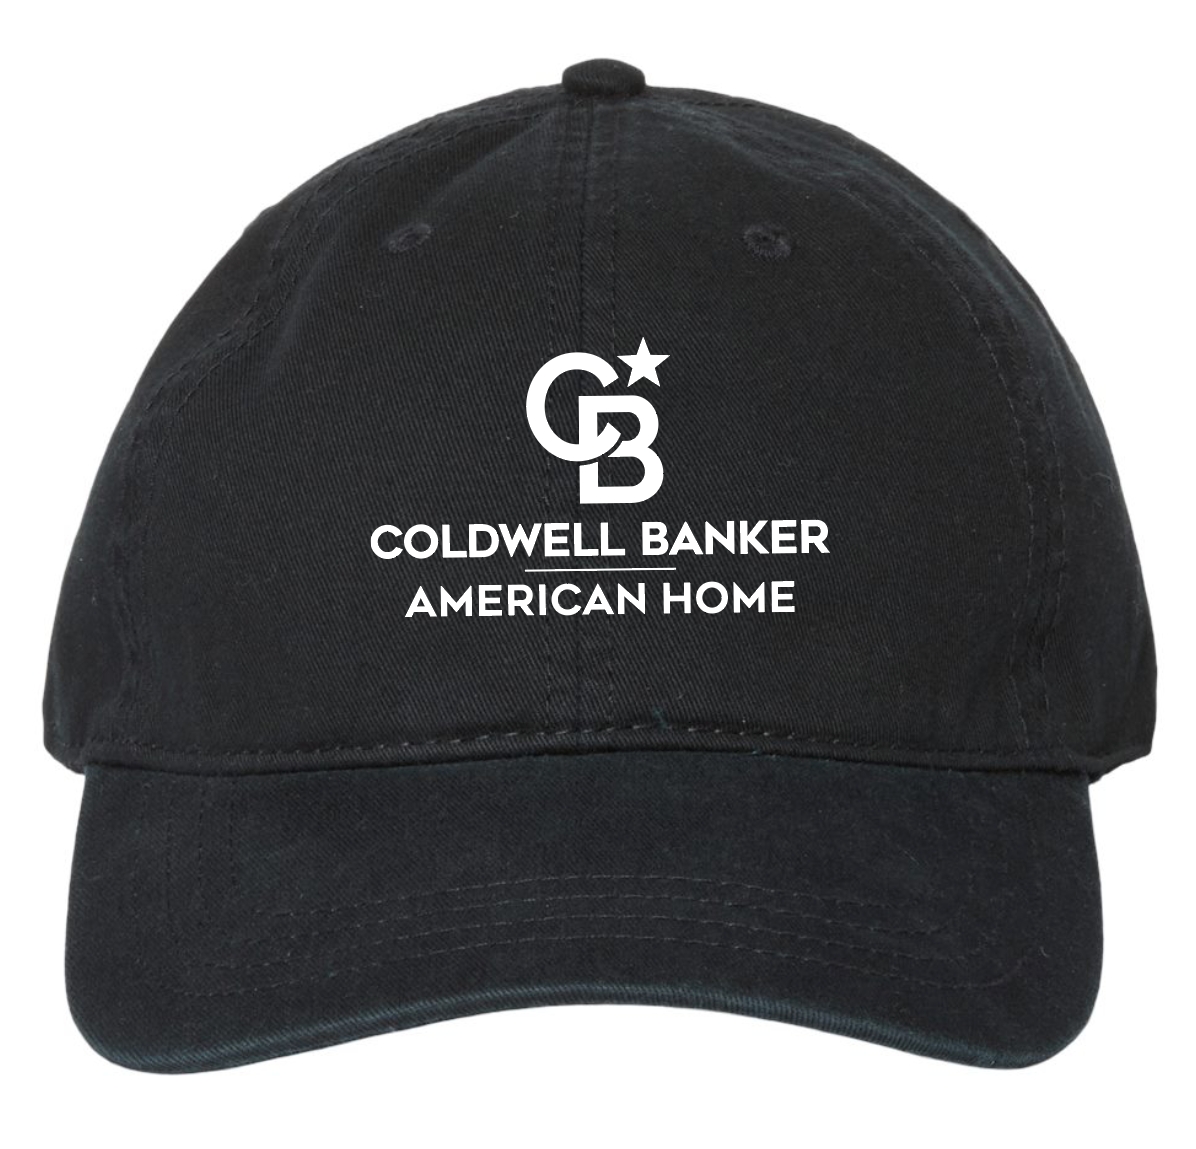 Coldwell Banker Relaxed Cap